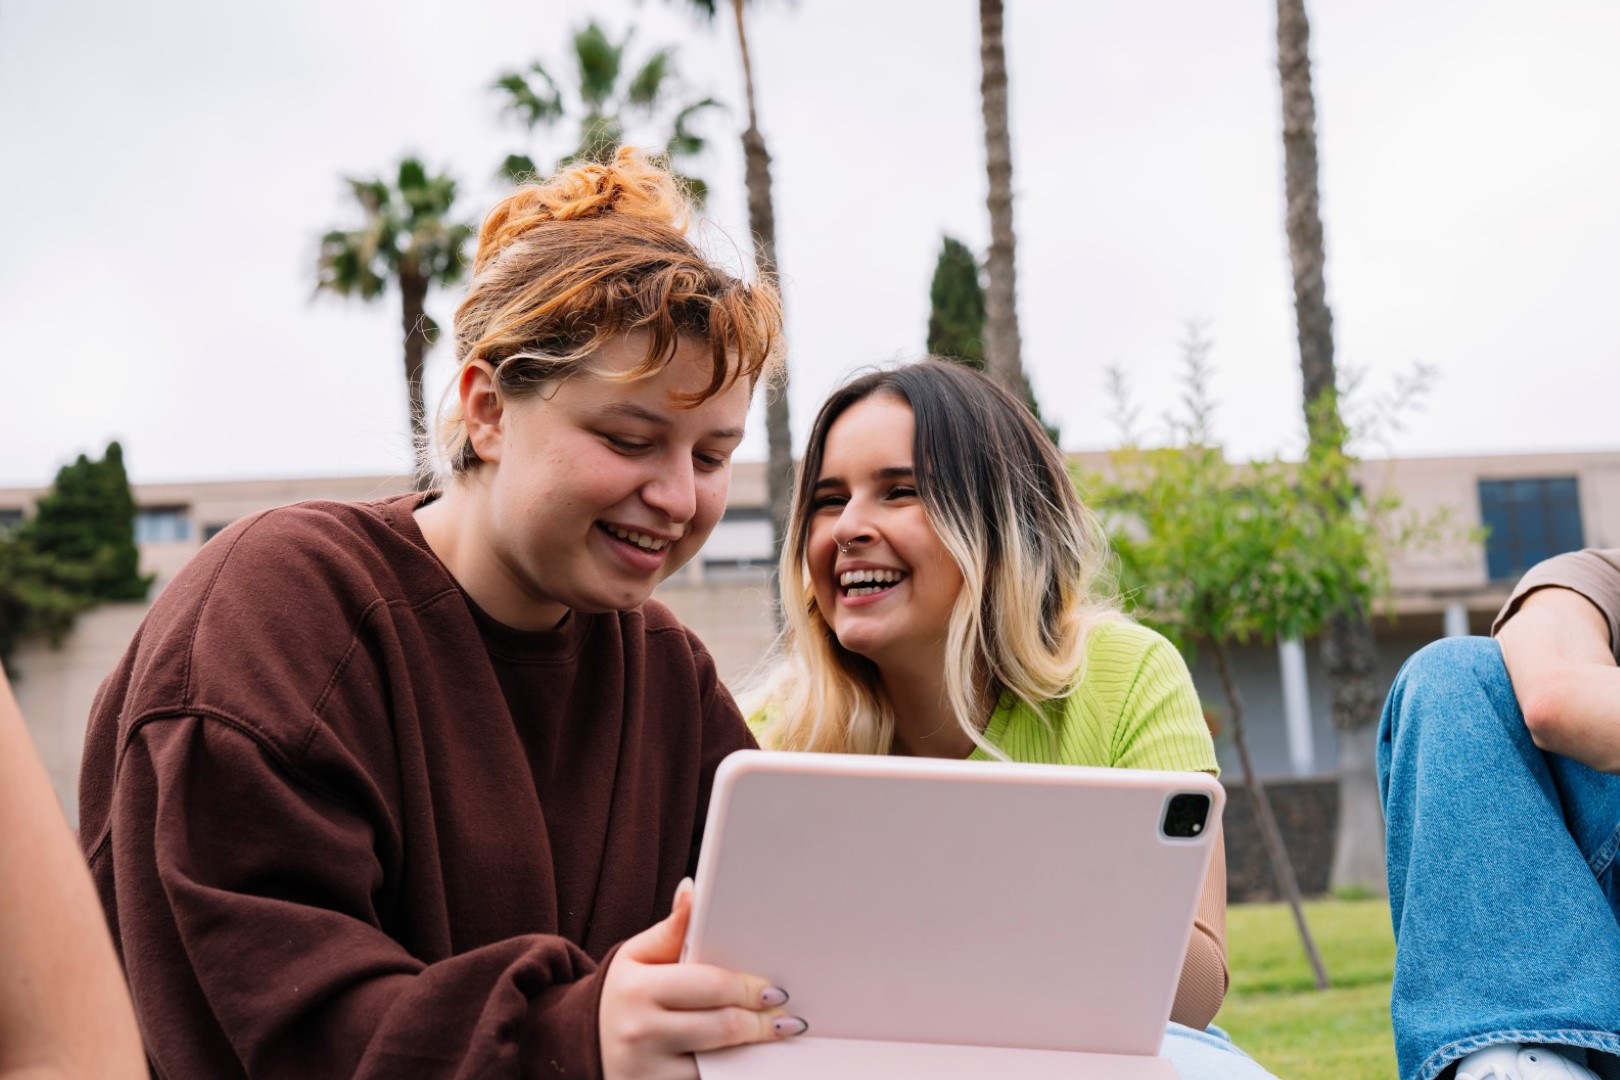 Two women smile while looking at a tablet screen